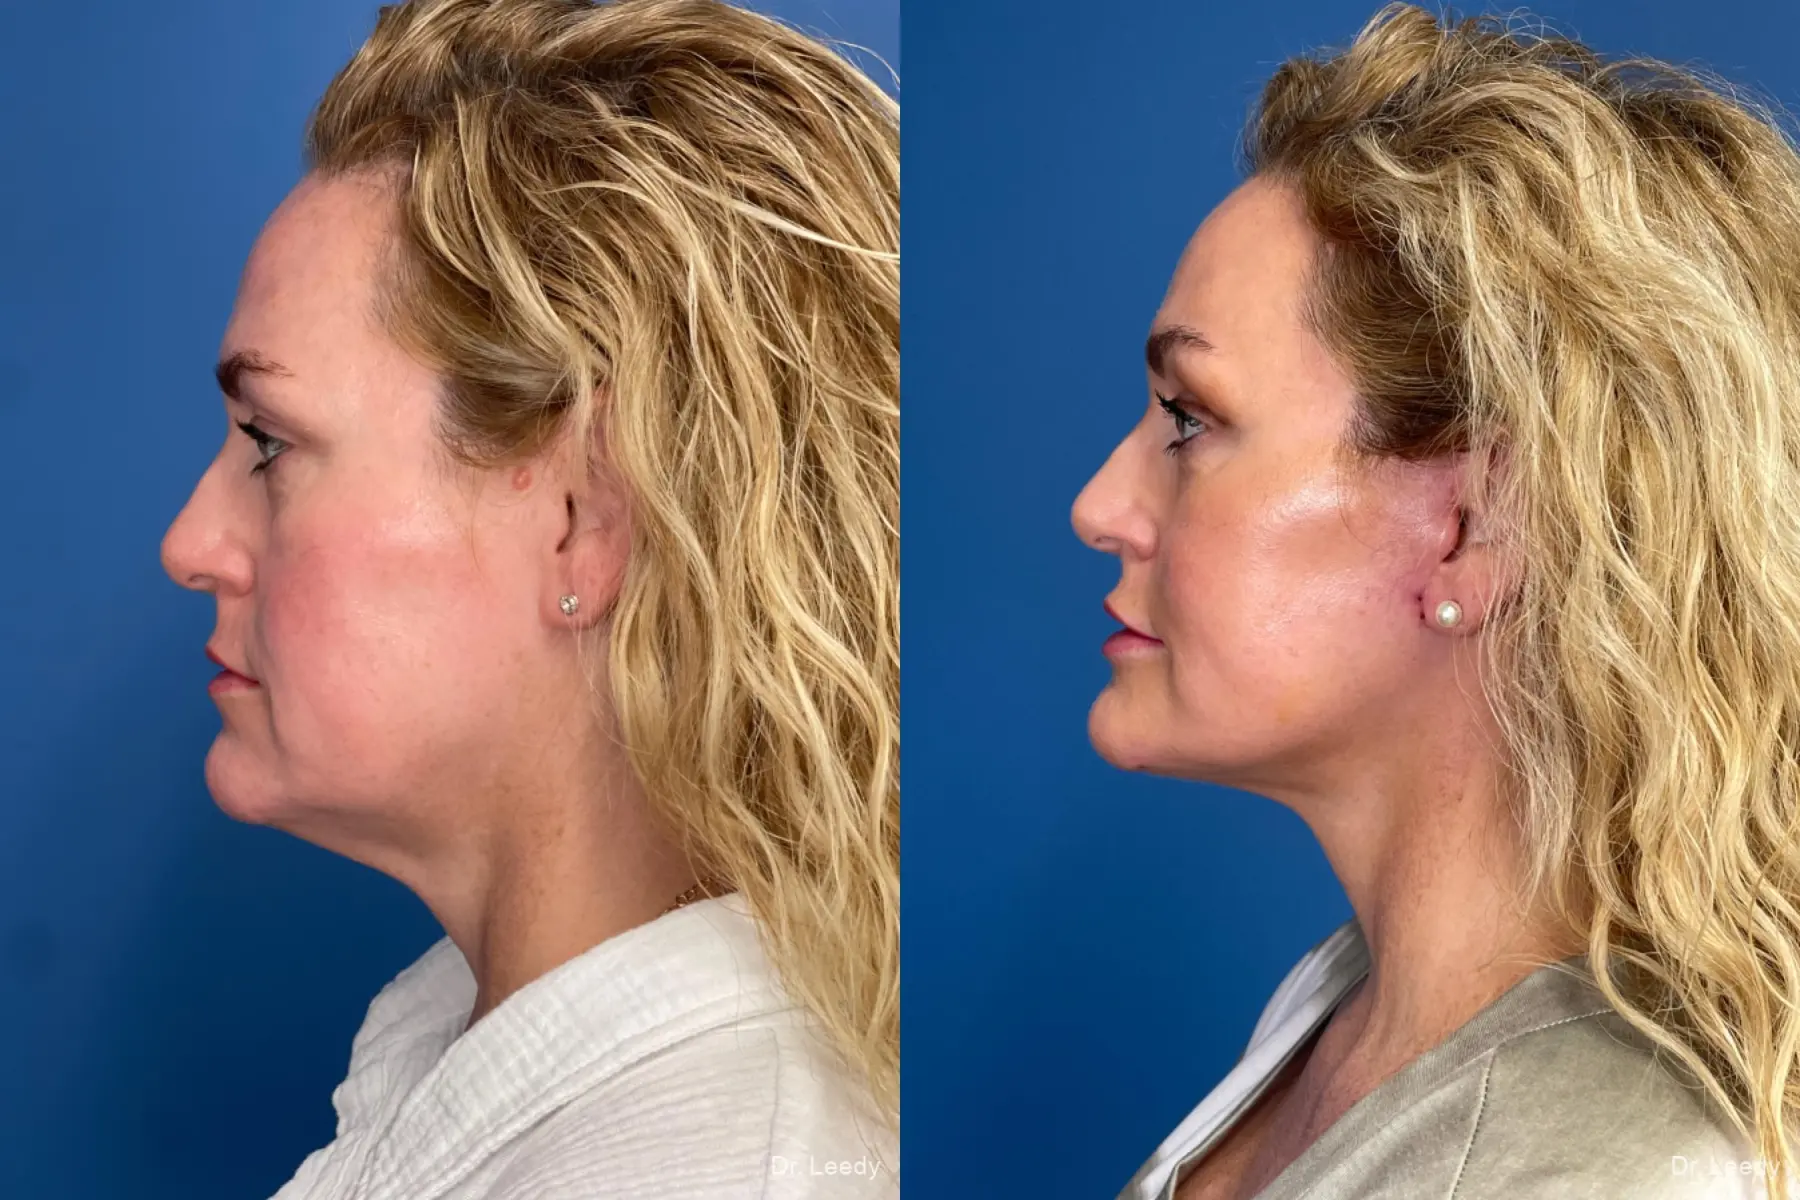 Facelift & Neck Lift: Patient 2 - Before and After 5